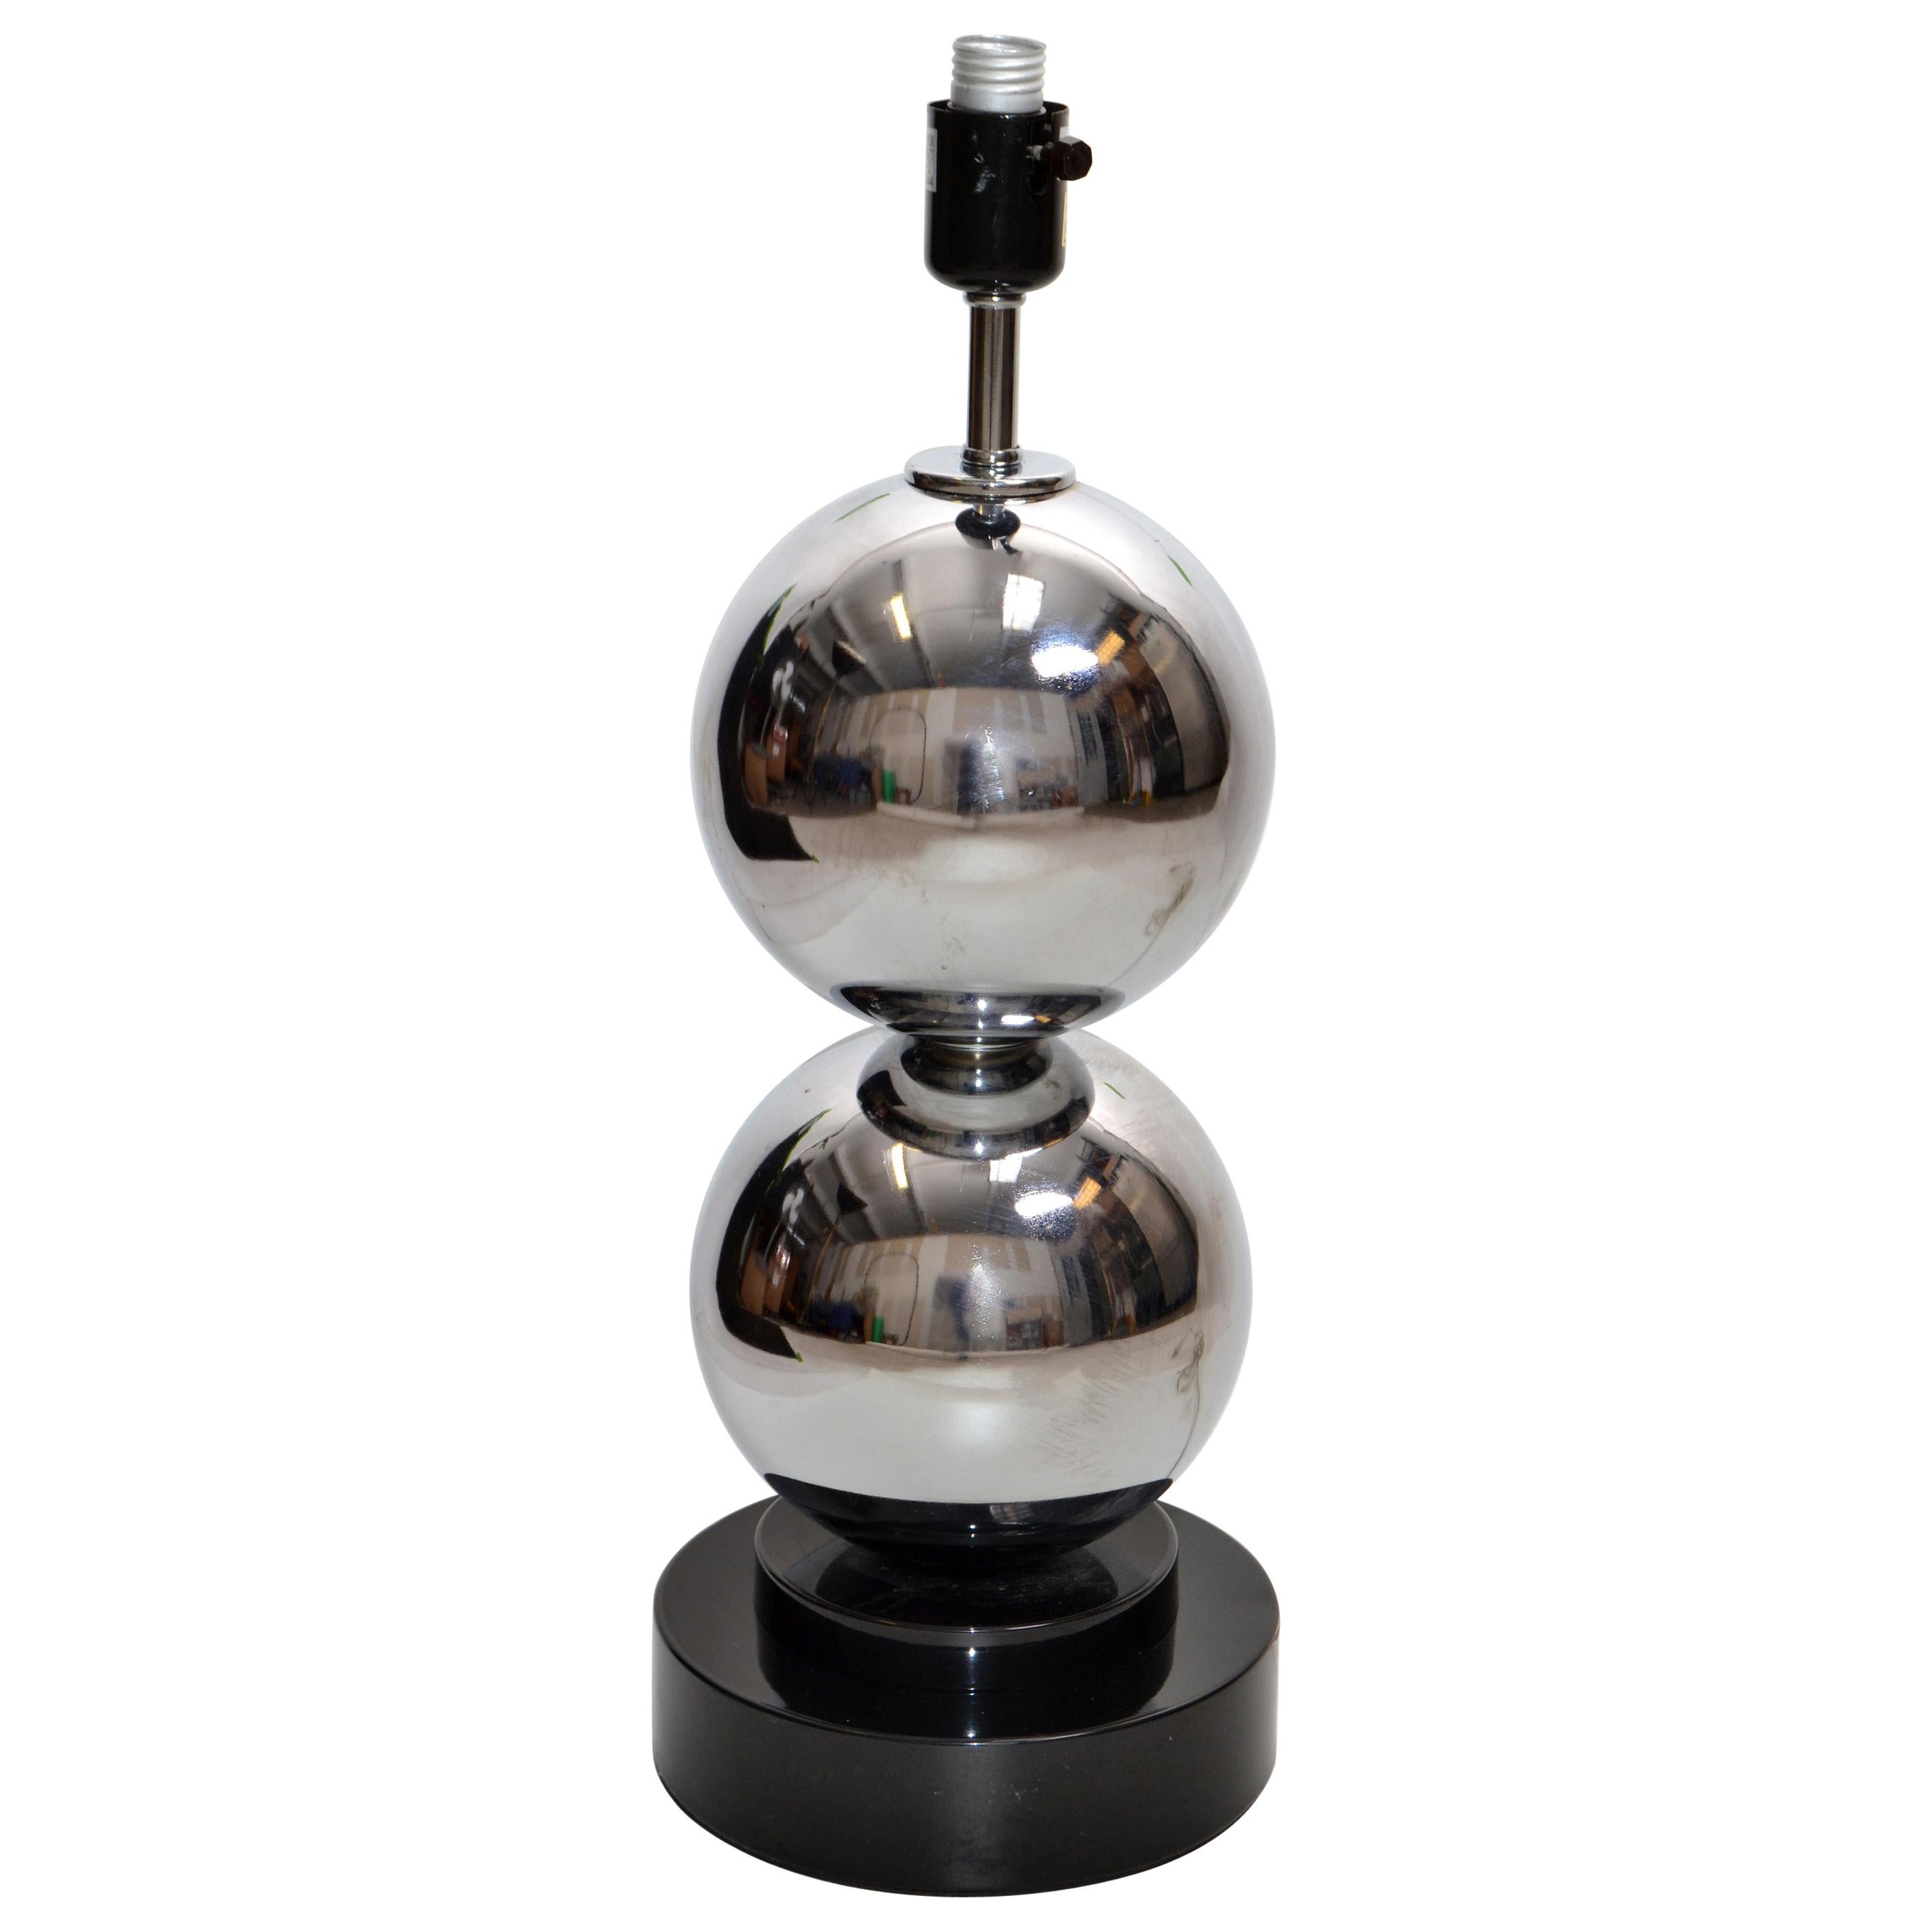 Van Teal Modern Chrome Ball Silver Finish Table Lamp 3-Way Switch Contemporary